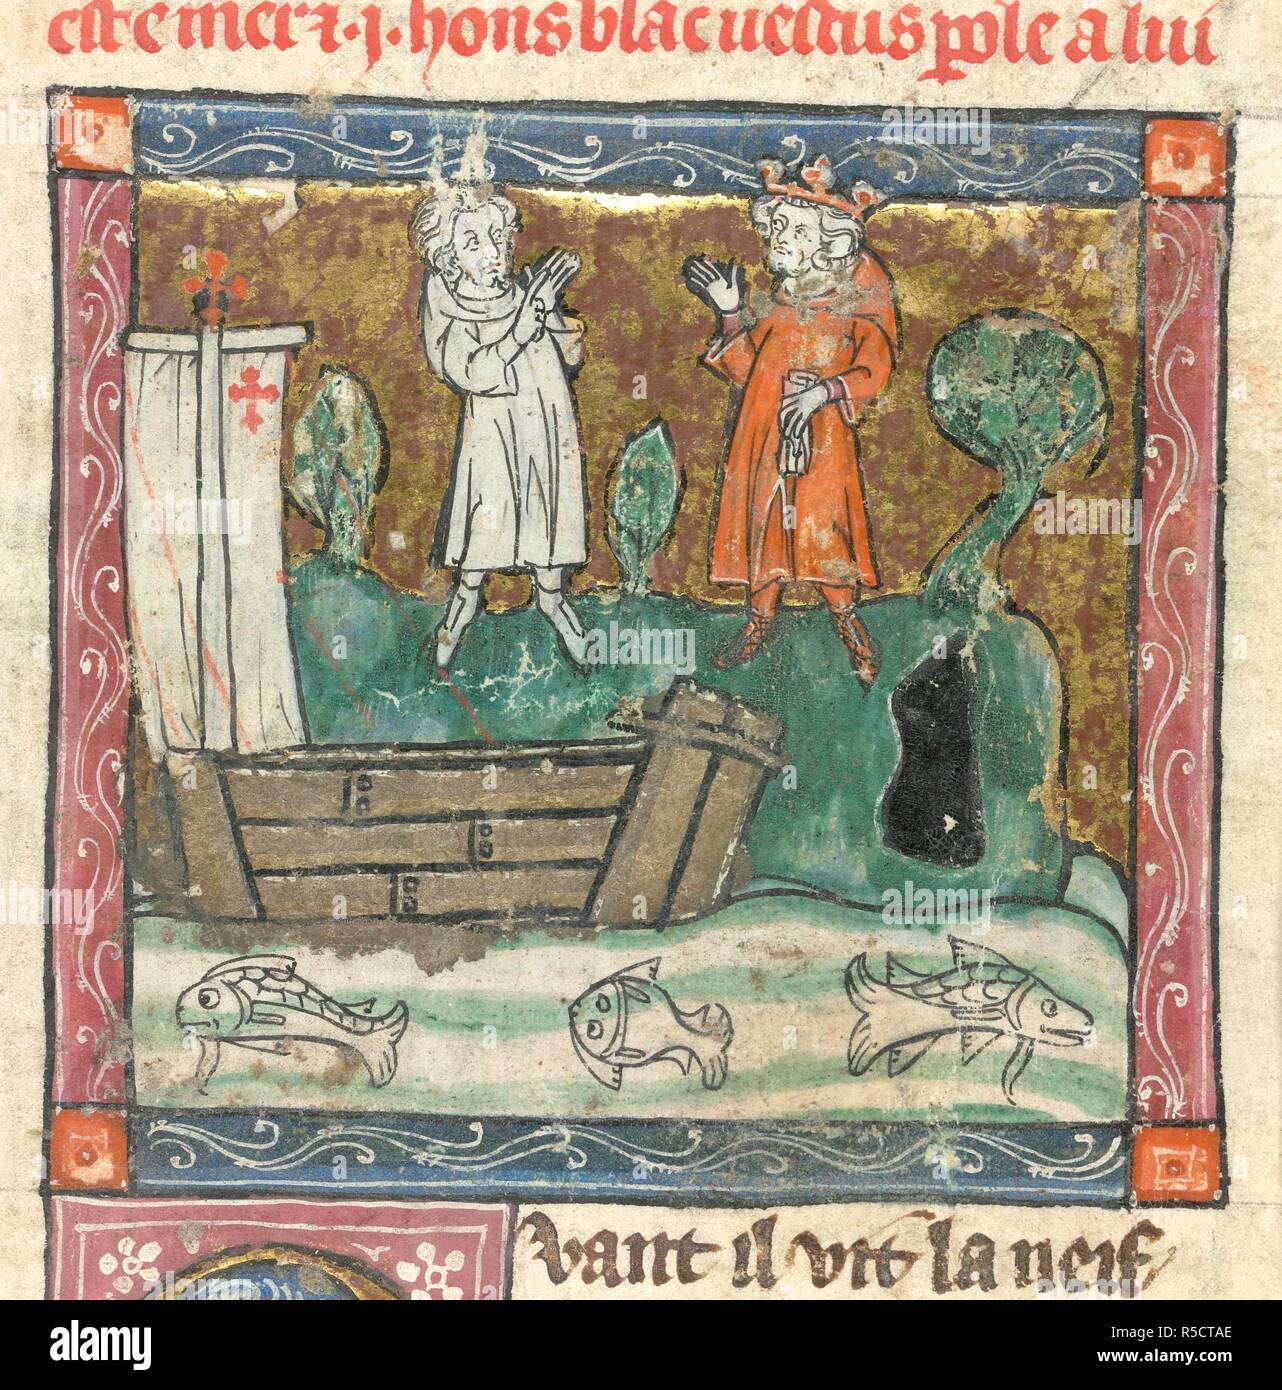 A king conversing with another figure. L'Estoire del Saint Graal. Beginning of the xivth century. Image taken from L'Estoire del Saint Graal. Source: Add. 10292, f.25. Language: French. Stock Photo